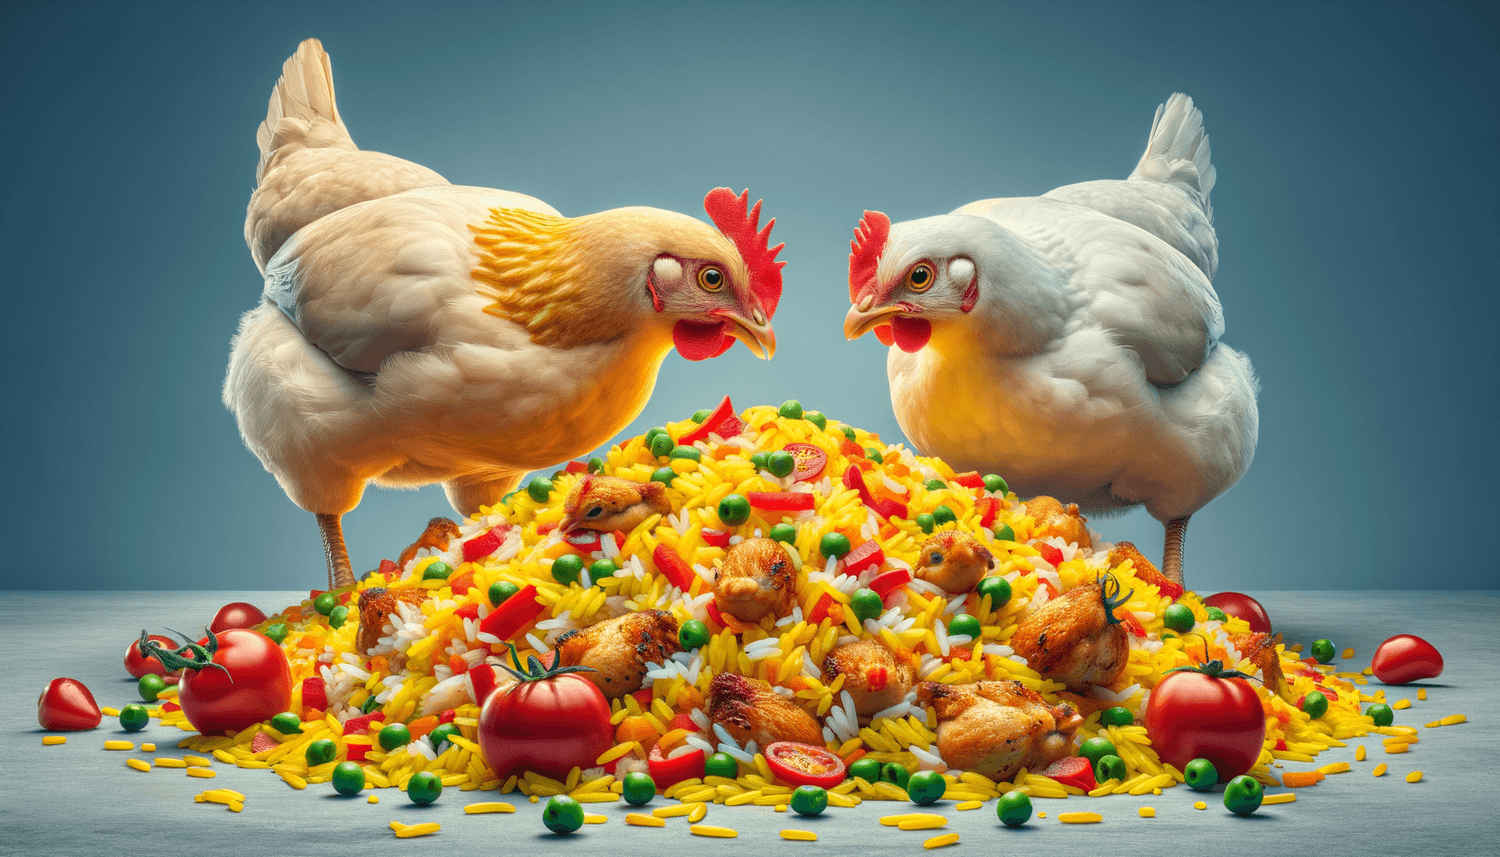 Can Chickens Eat Spanish Rice?